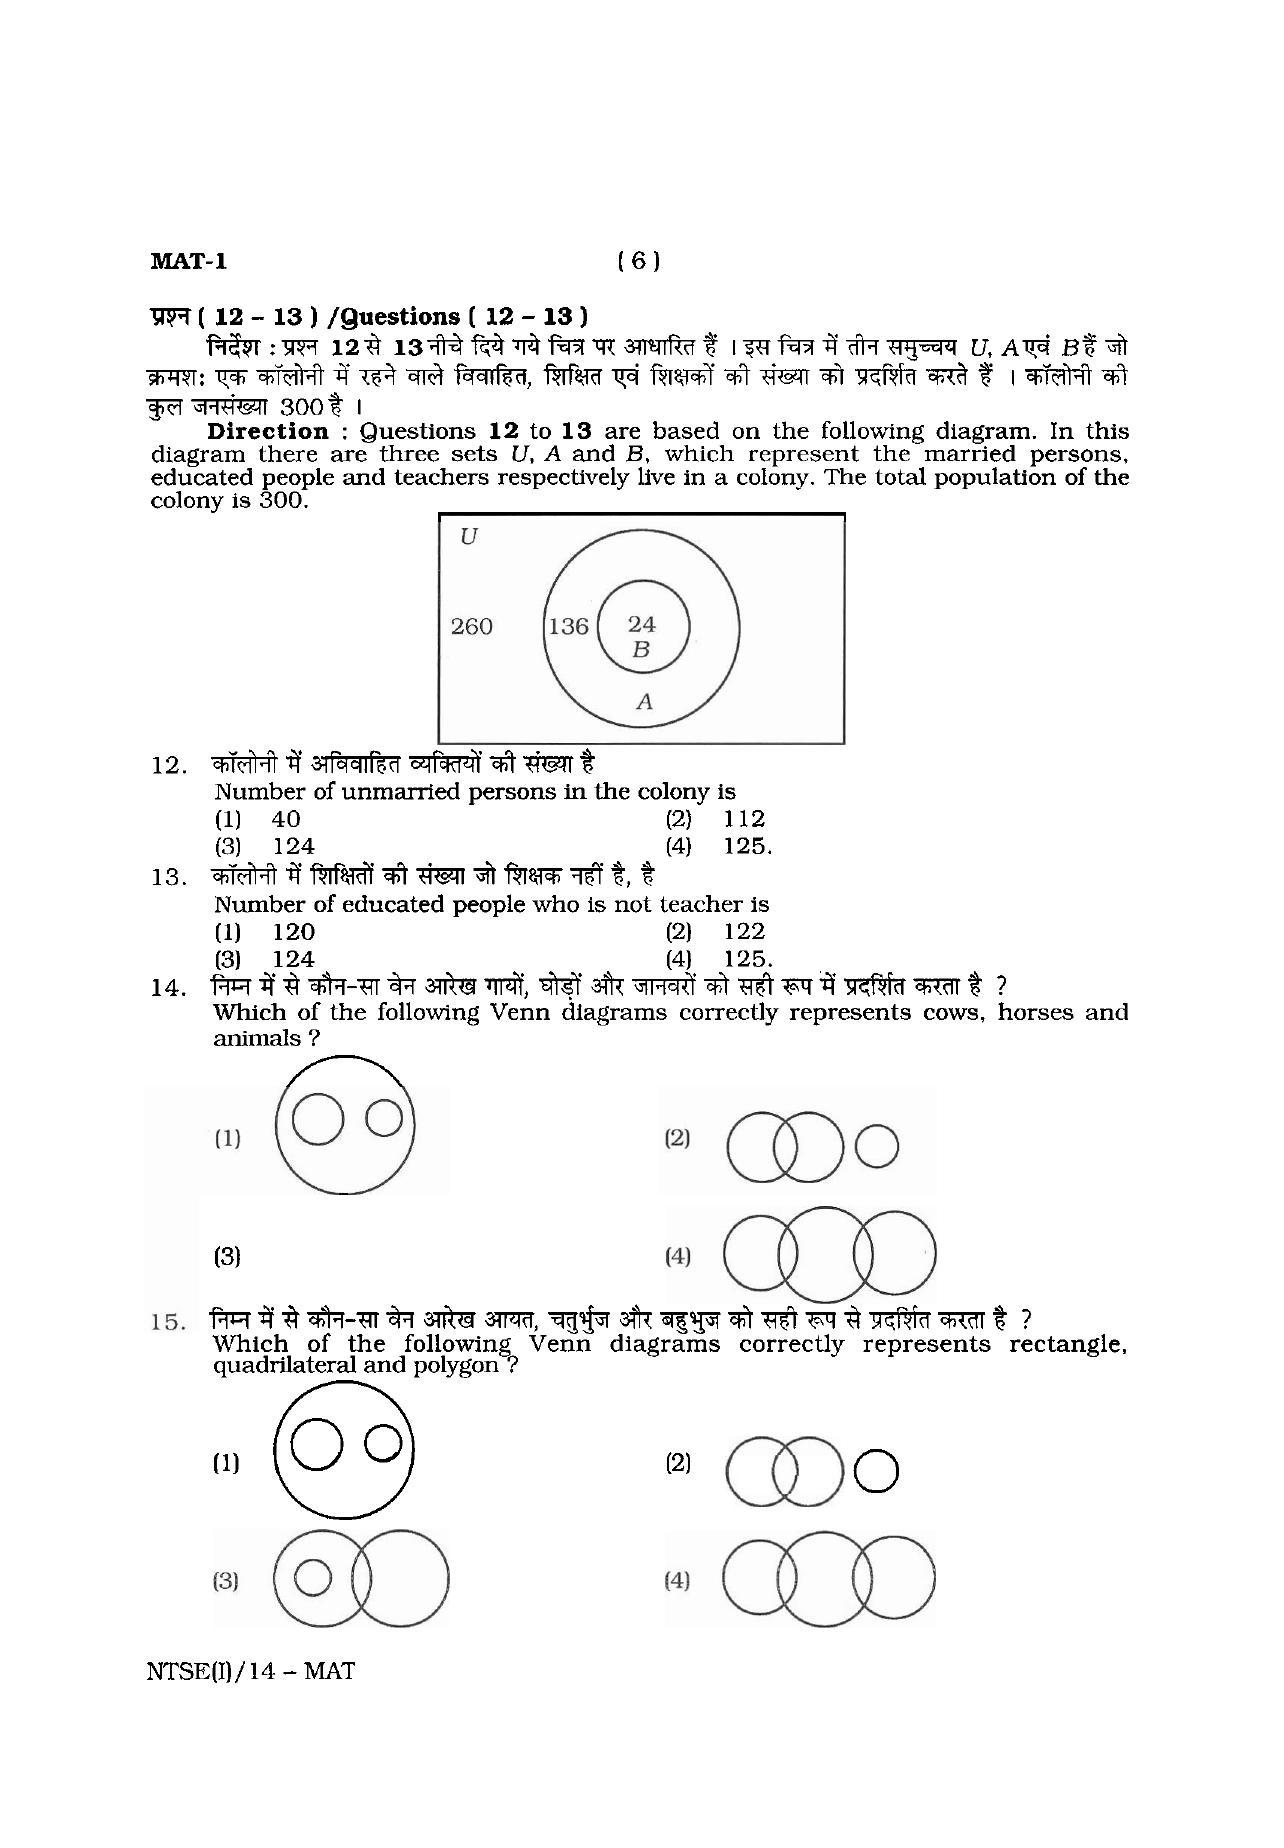 NTSE 2014 (Stage II) MAT Question Paper - Page 6